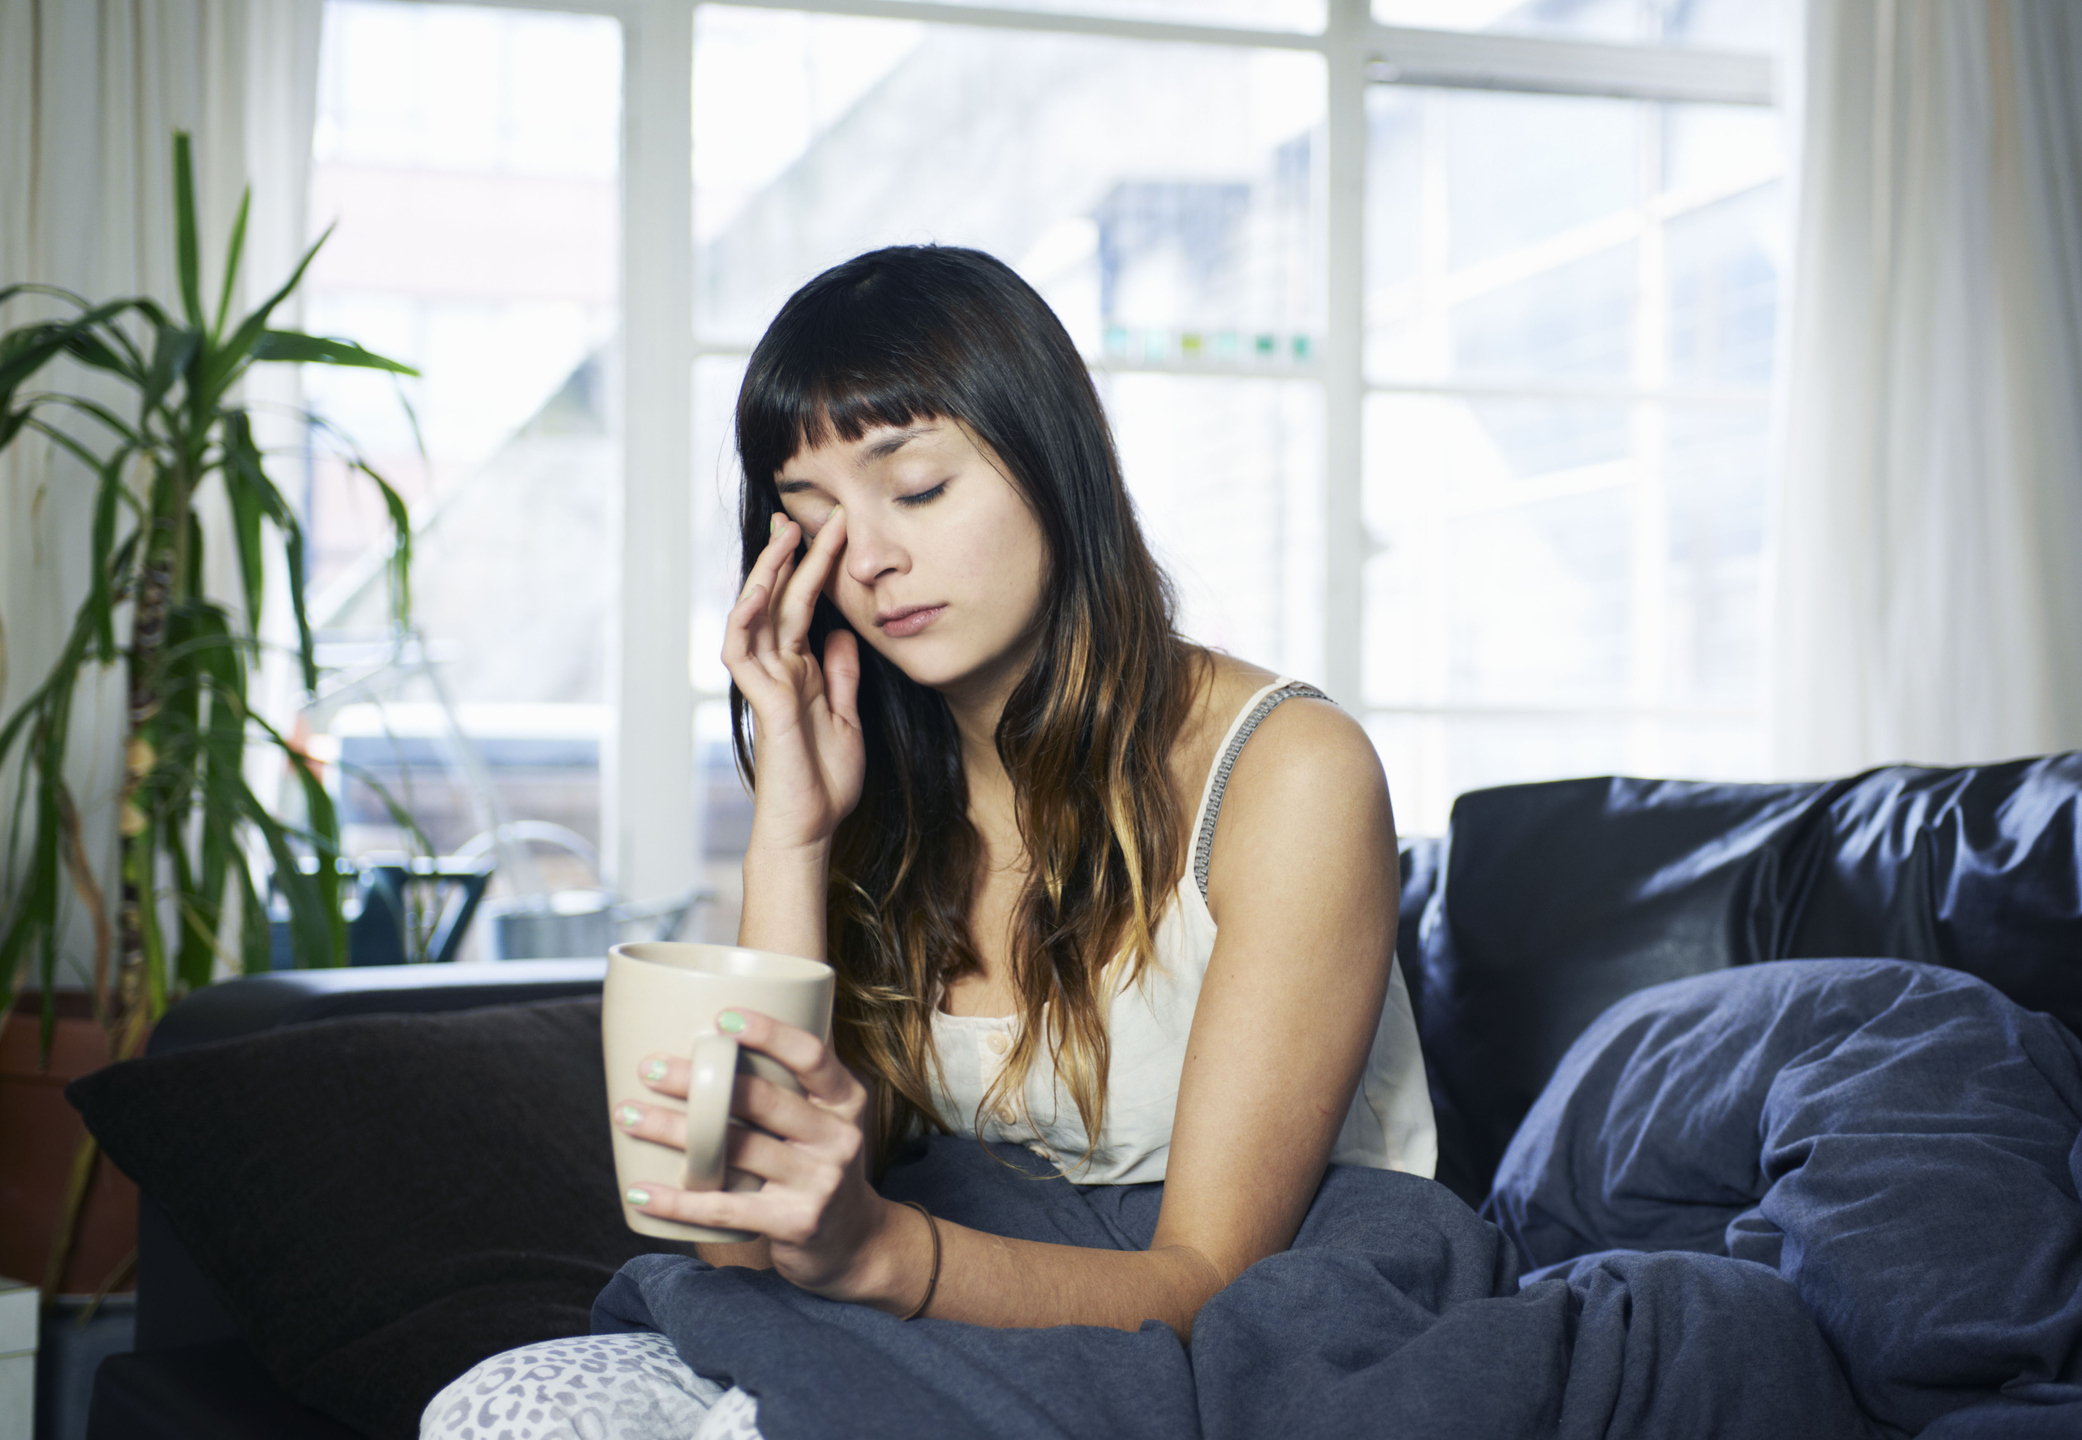 A tired looking woman sits on her couch and rubs her face while holding a mug